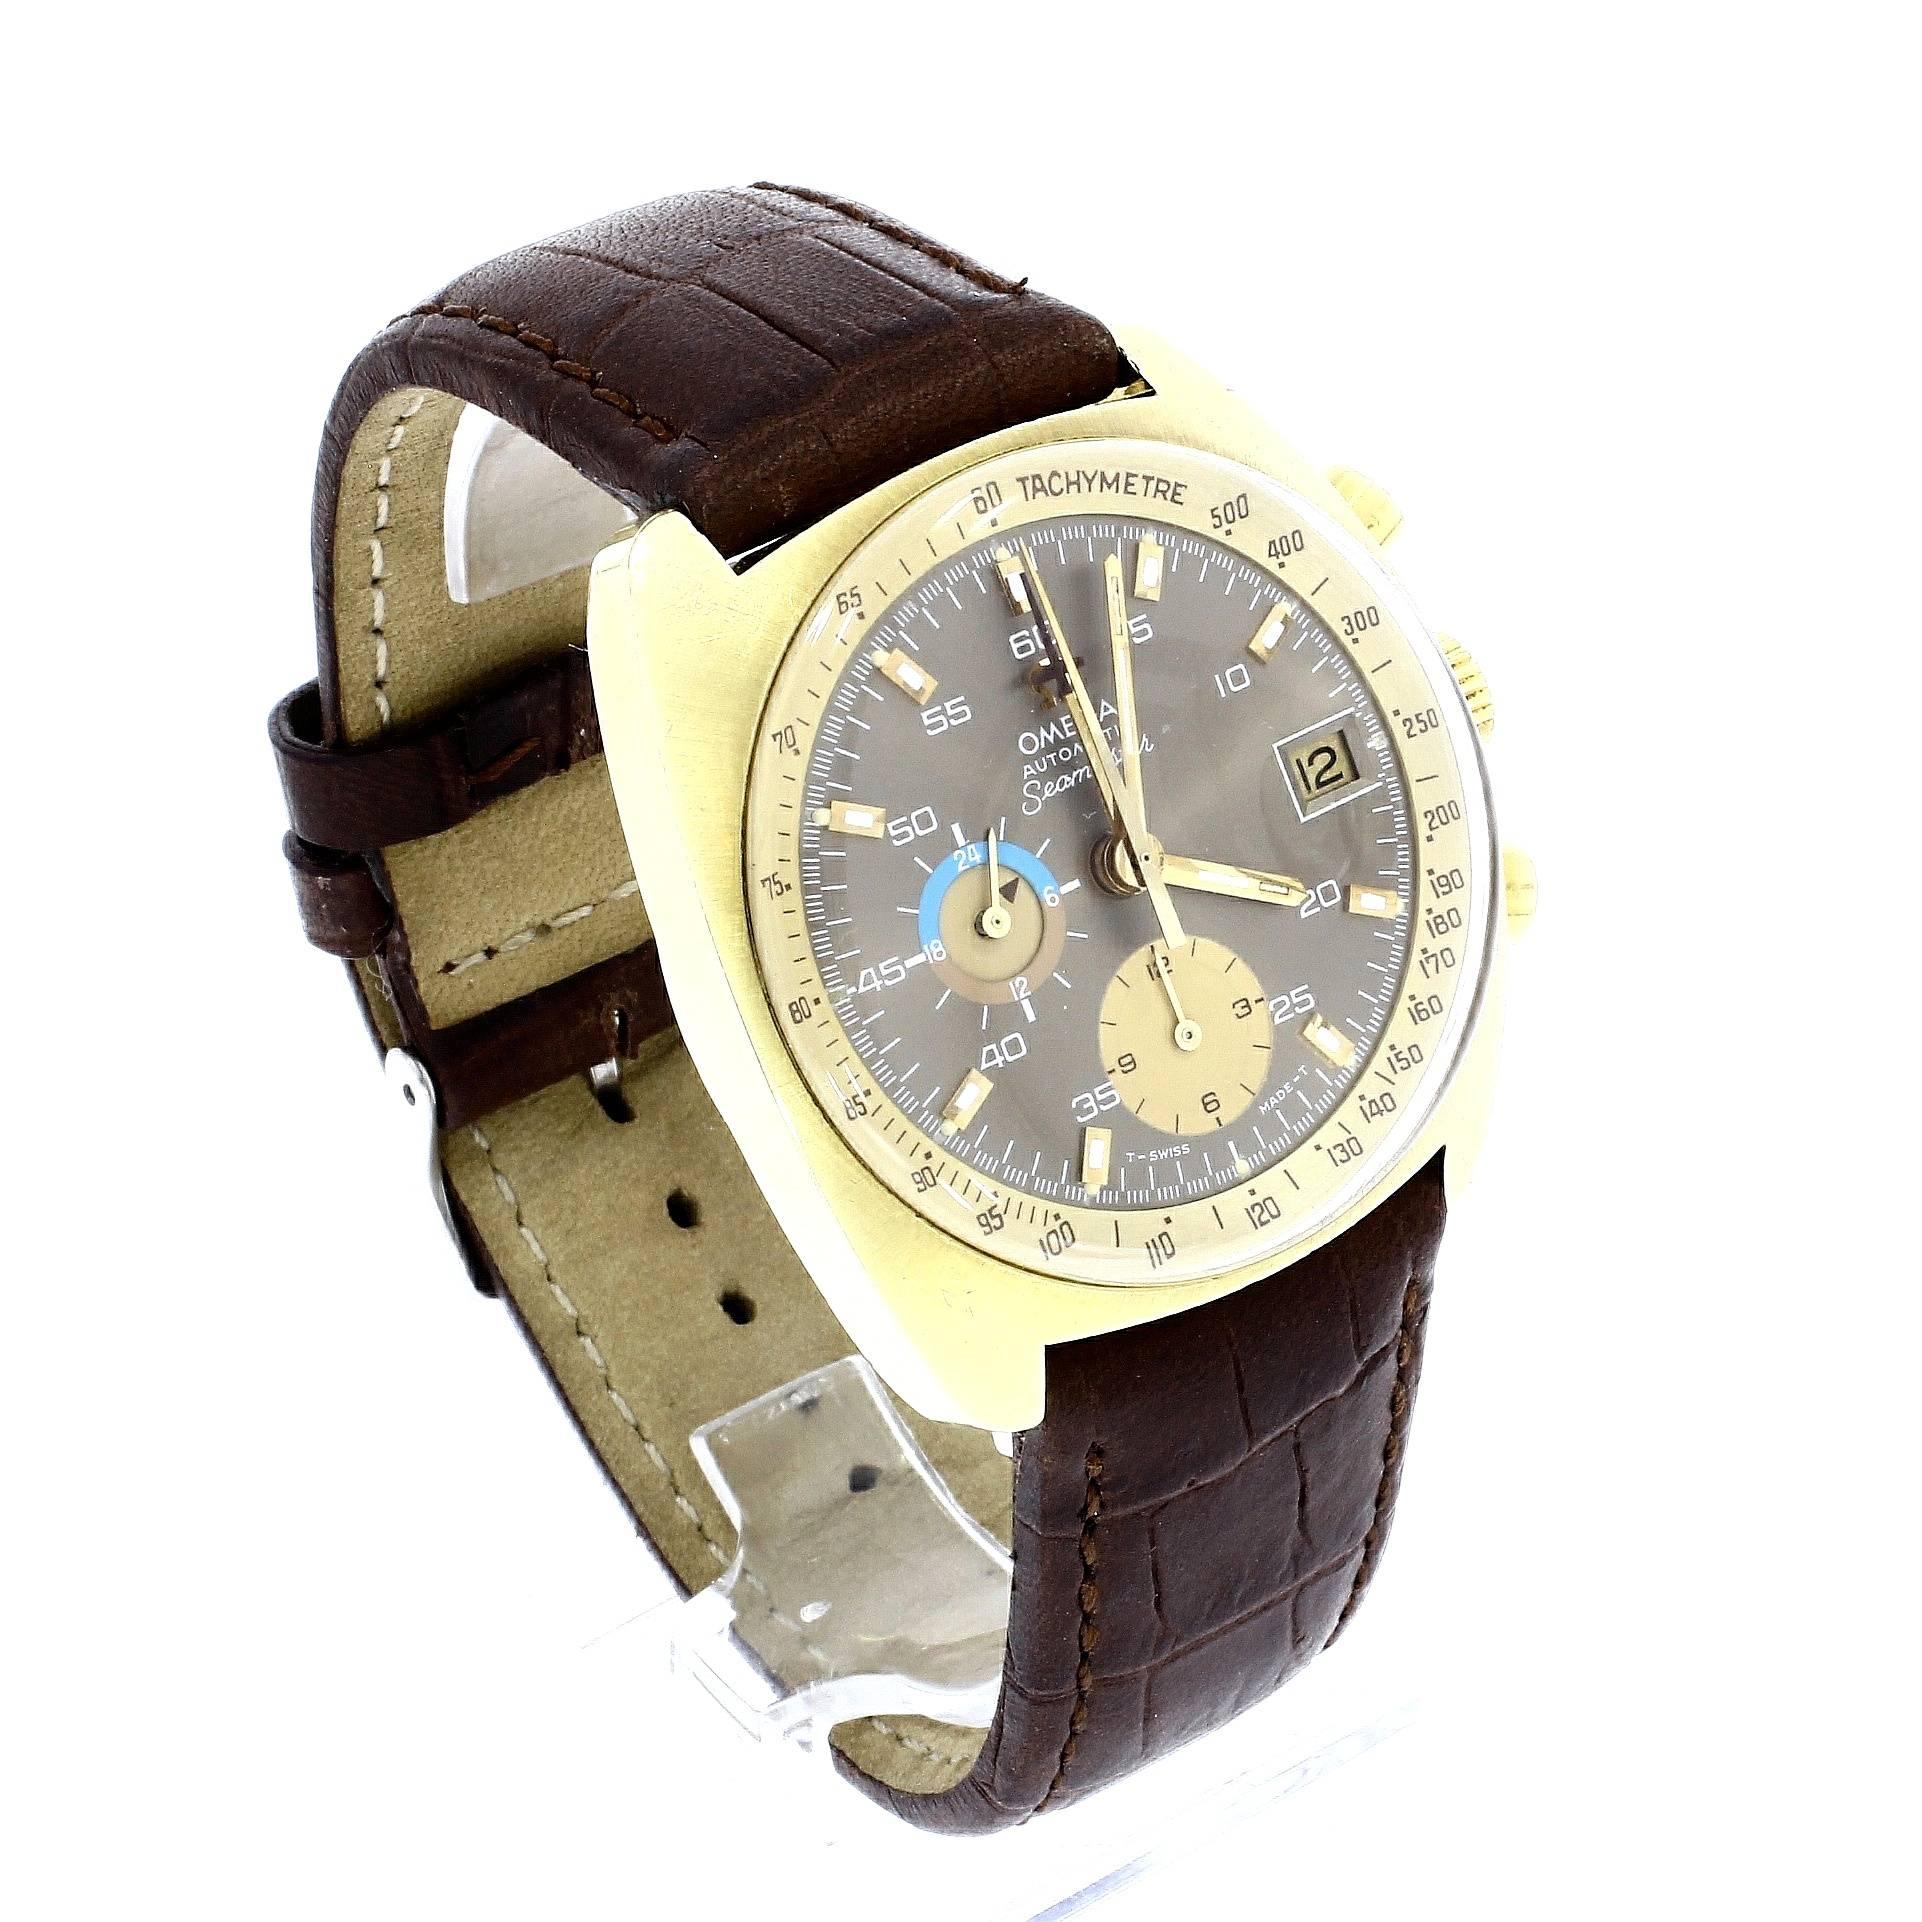 Omega Gold Plated Seamaster Chronograph Wristwatch Ref 176.007 For Sale 2